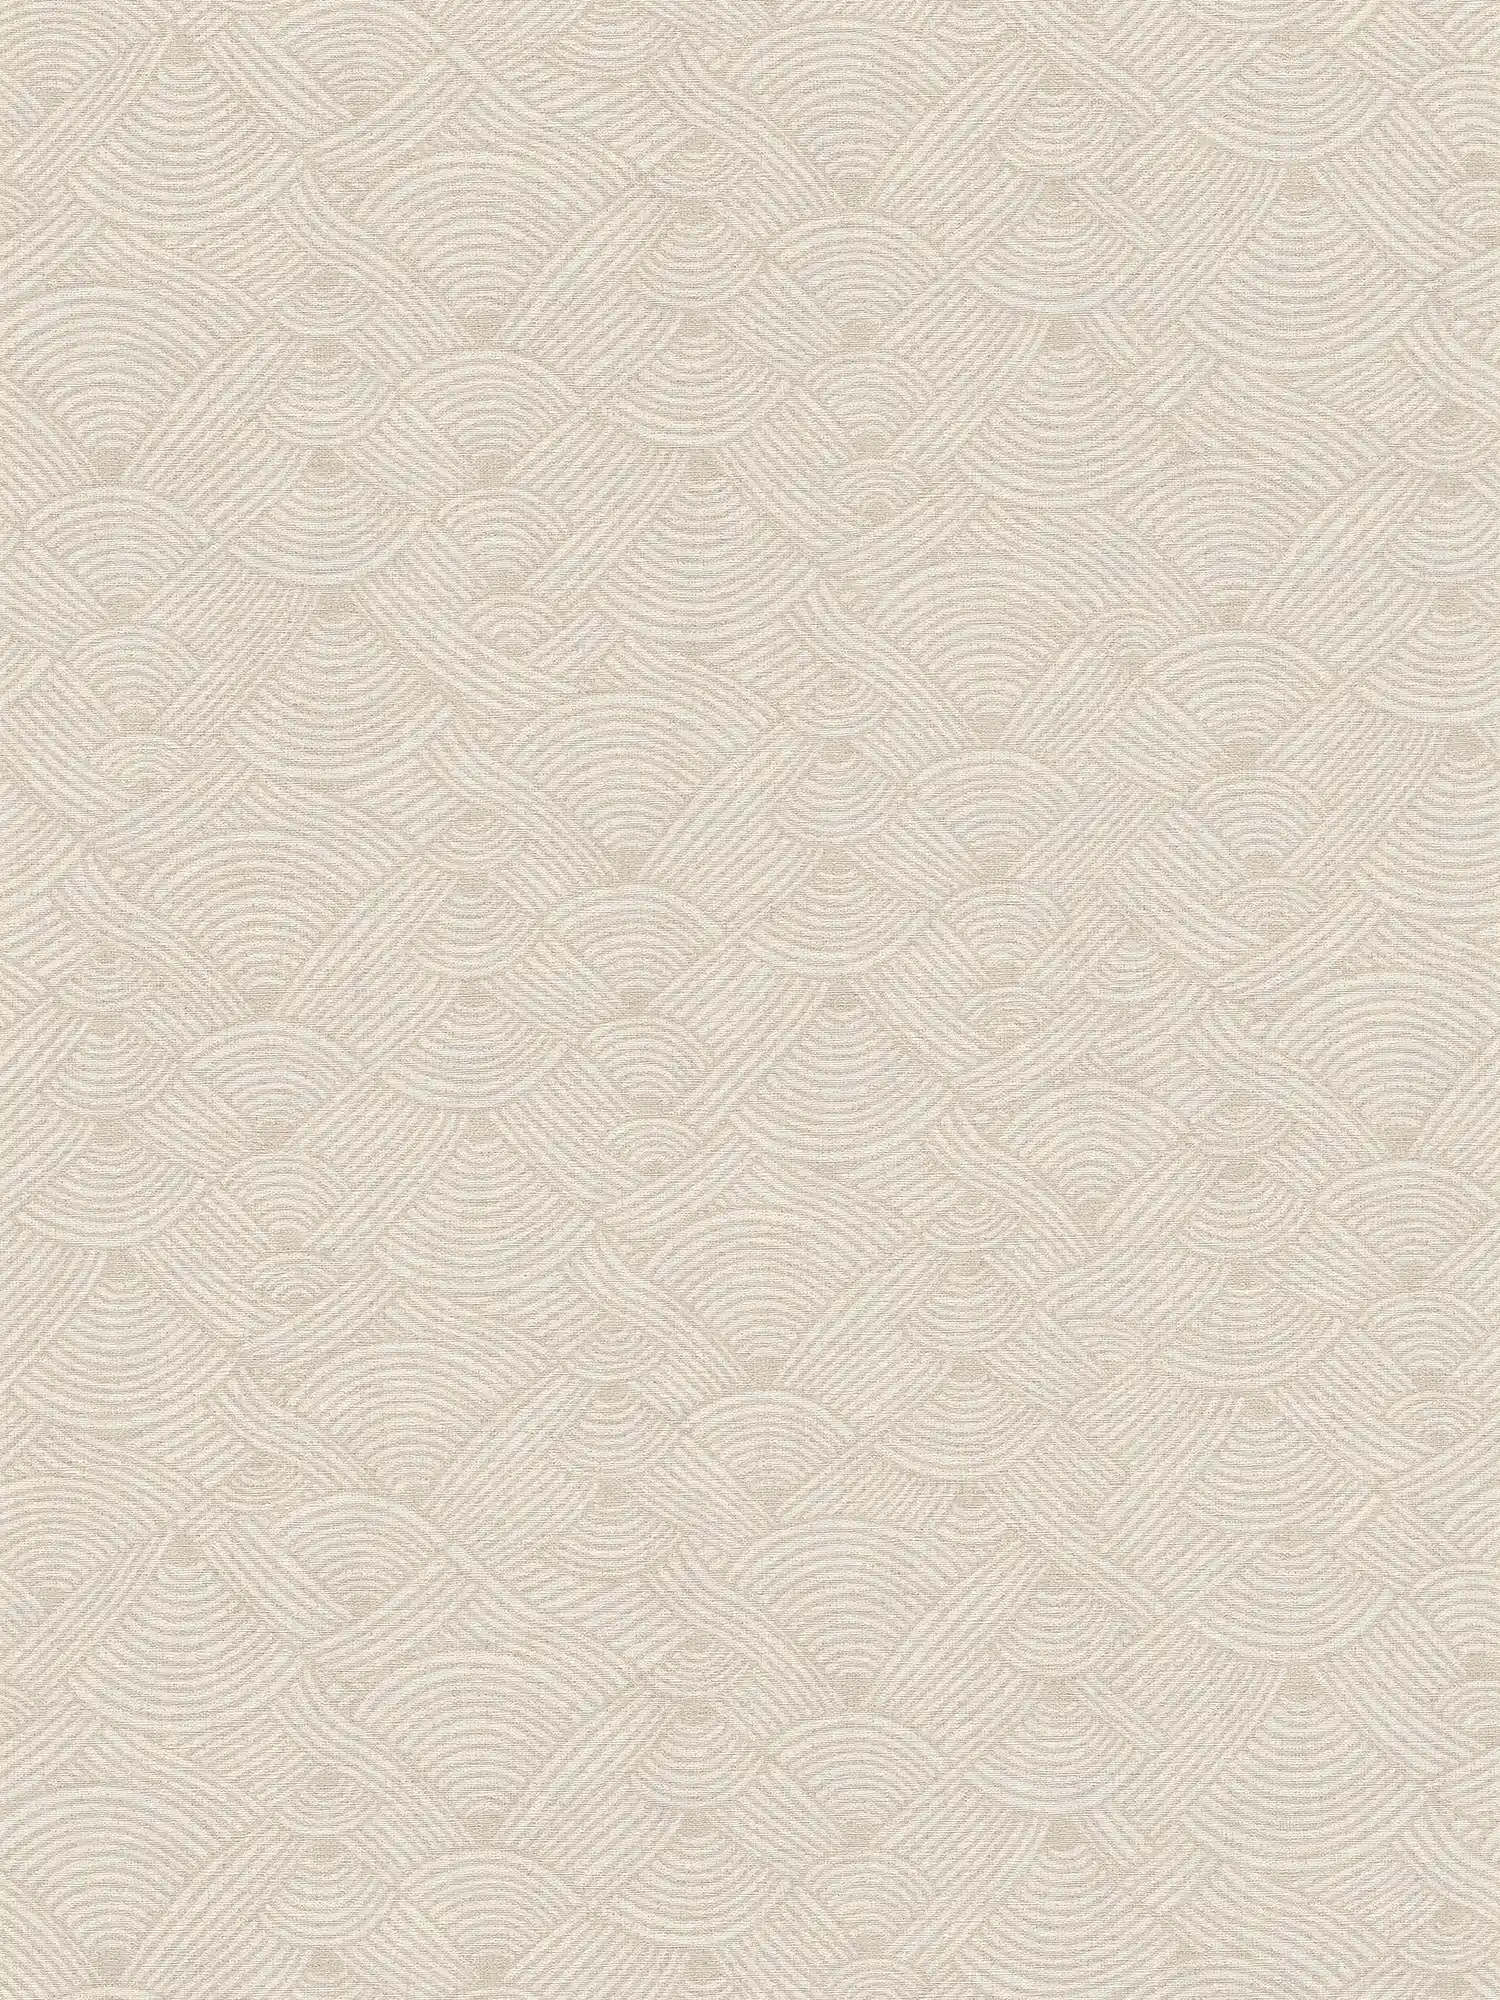 Cream beige wallpaper wave pattern with texture details in ethnic style
